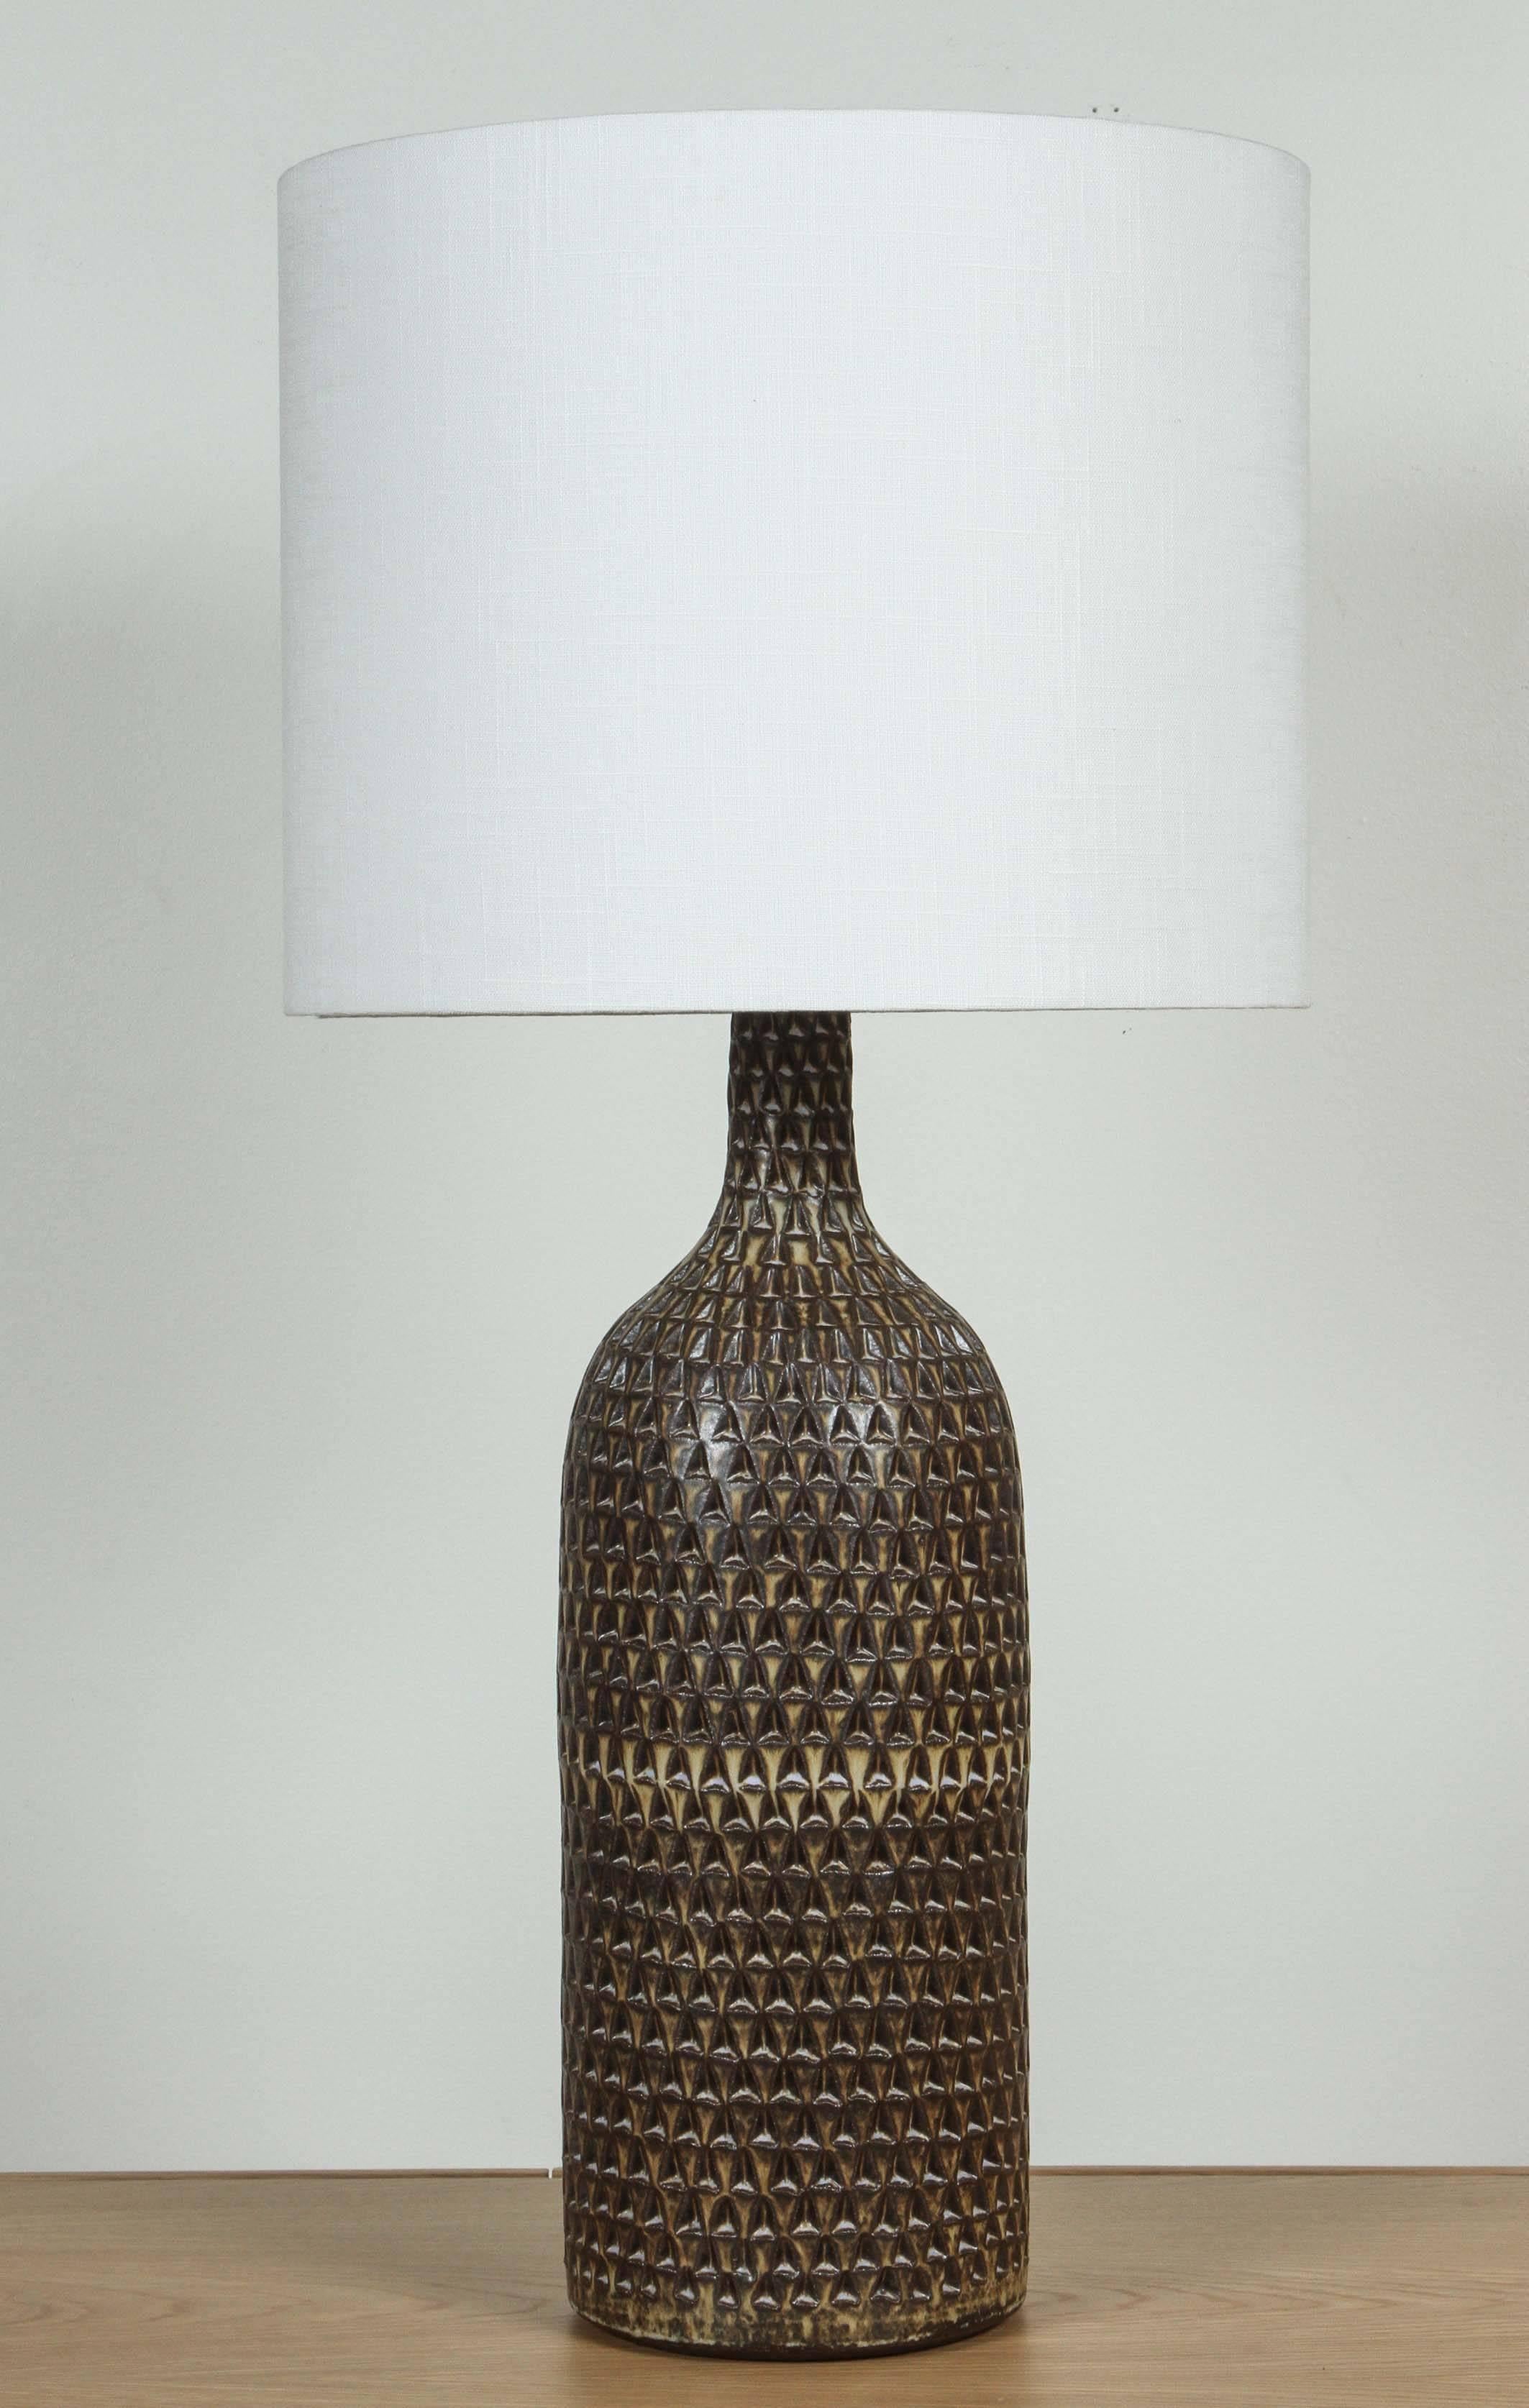 Extra large carved bottle lamp by Victoria Morris.